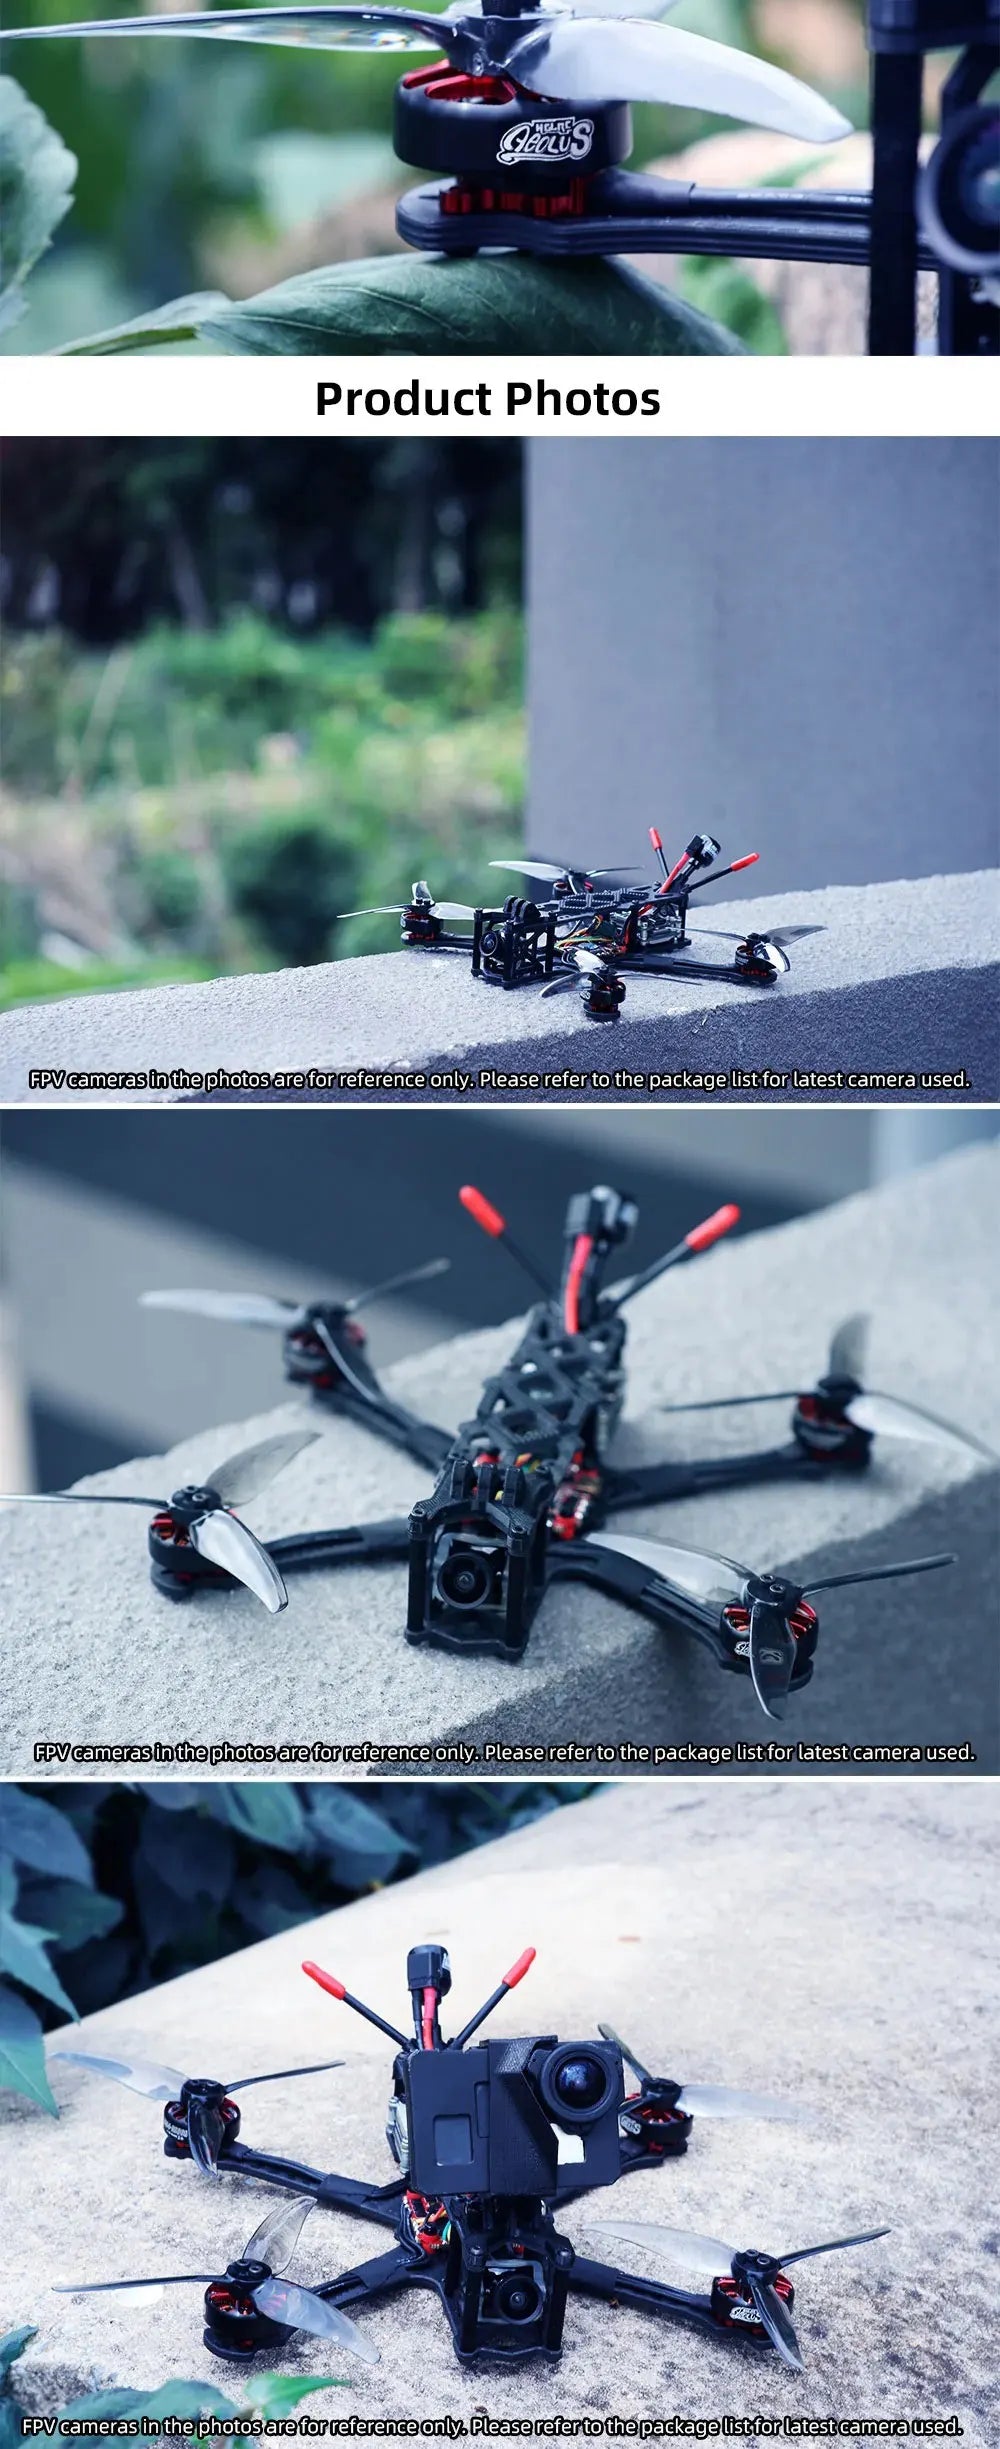 HGLRC Sector 4 FR Sub250g Freestyle FPV Drone, Geouis Product Photos FPVcamerasinthephotosareforreference